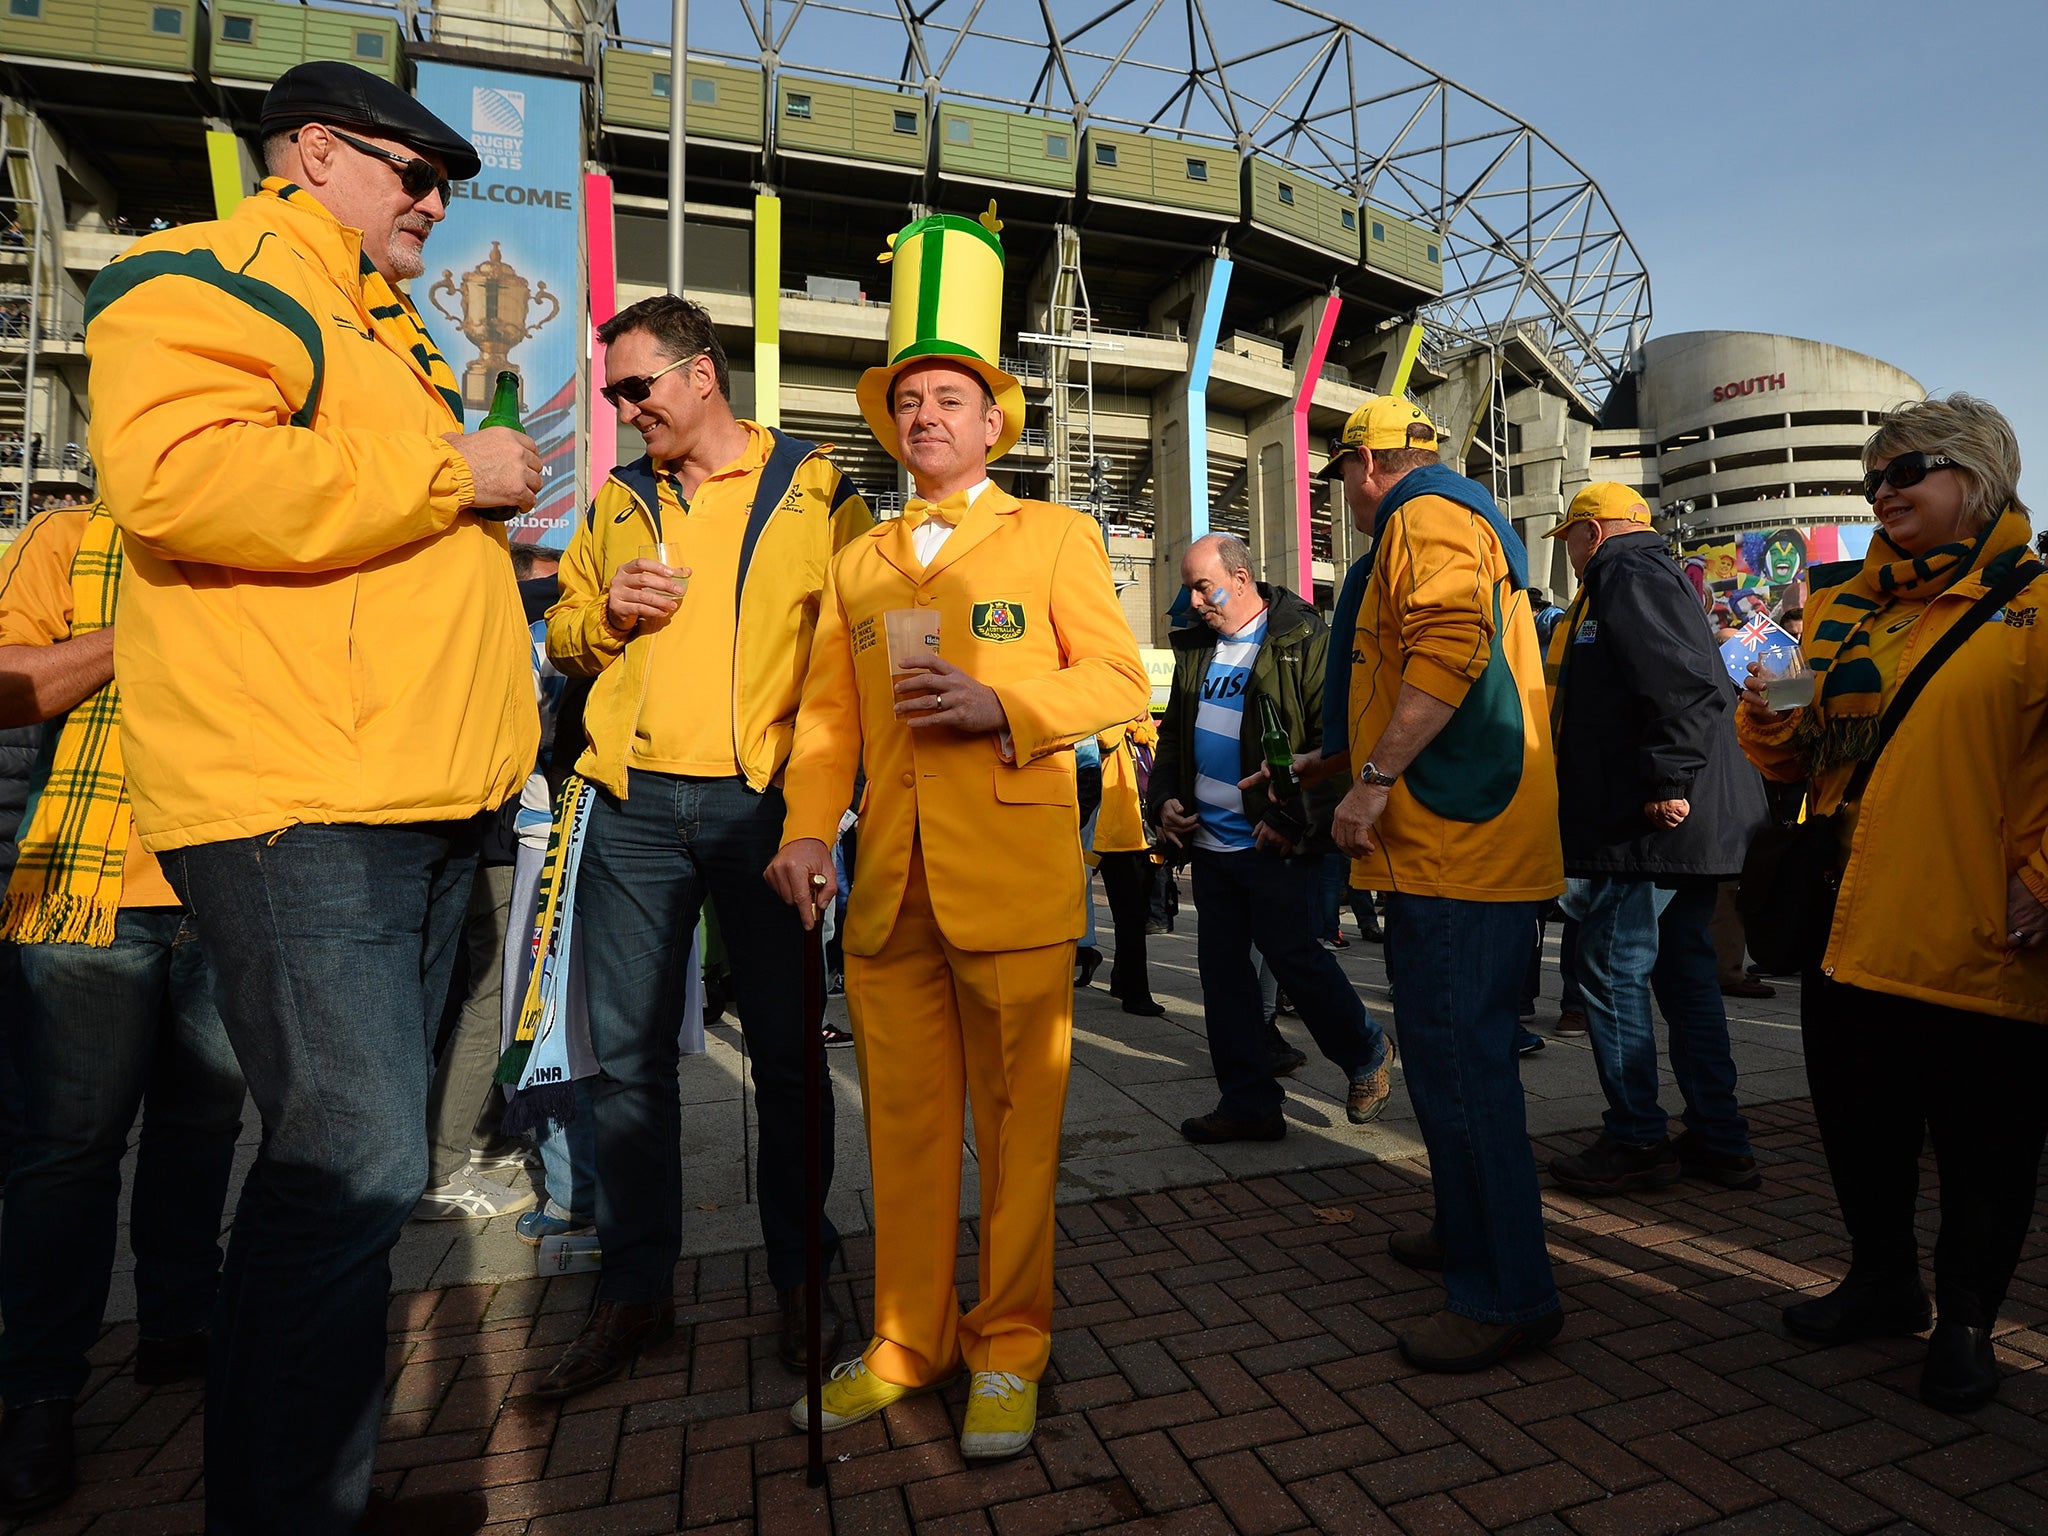 Australia supporters have a drink outside Twickenha prior to the semi-final victory against Argentina